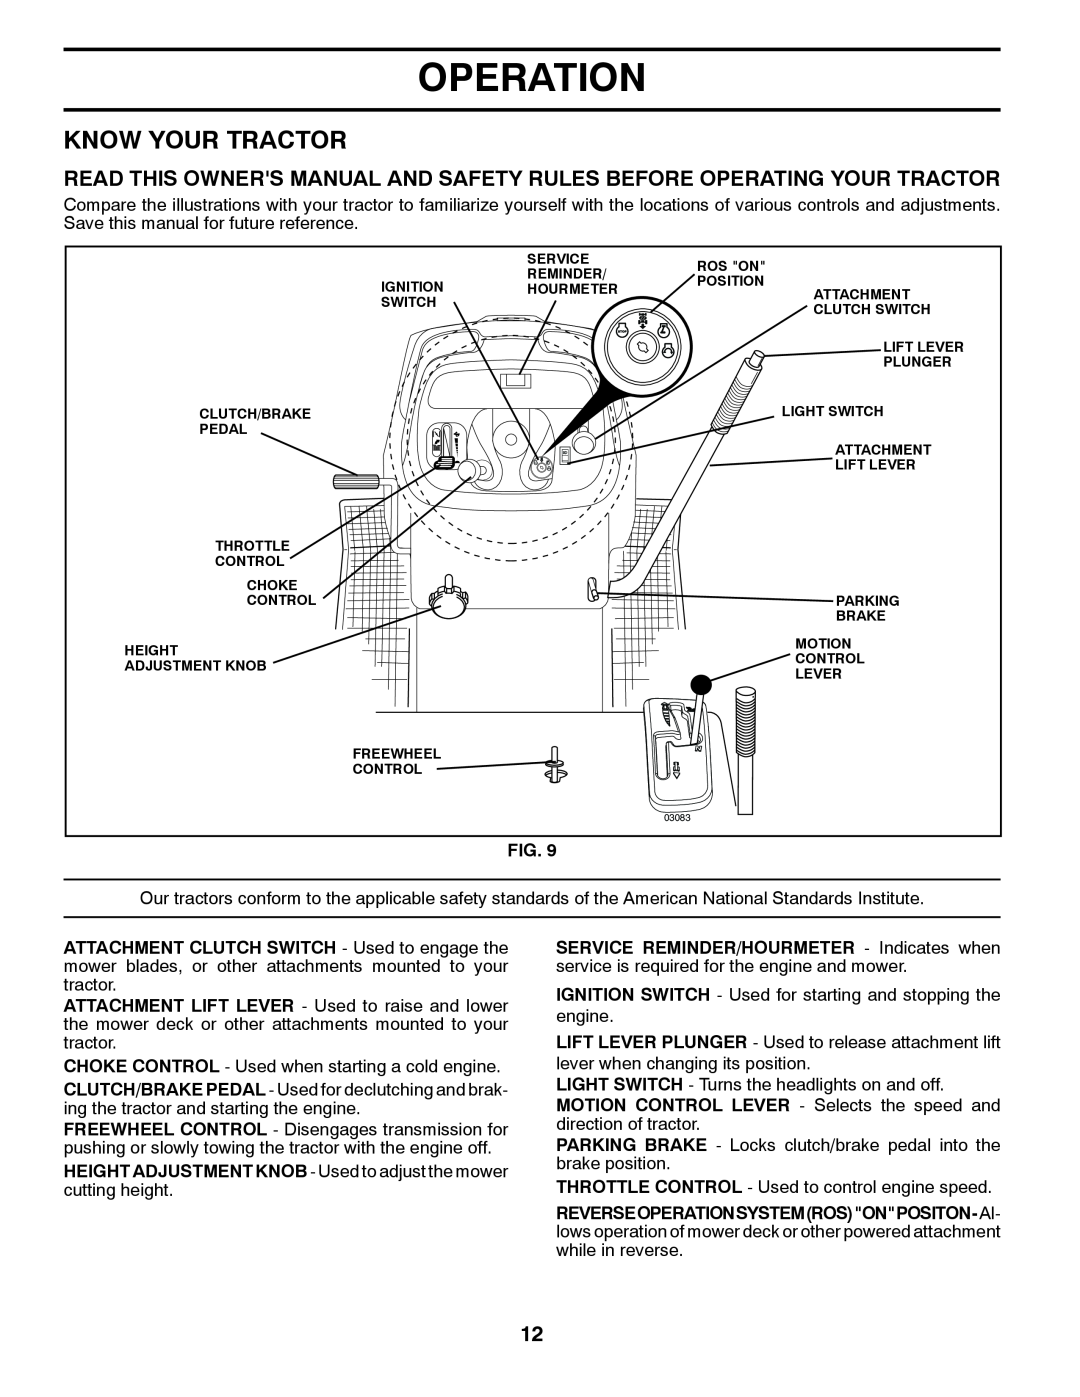 Husqvarna CTH2036 XP owner manual Know Your Tractor, Operation 